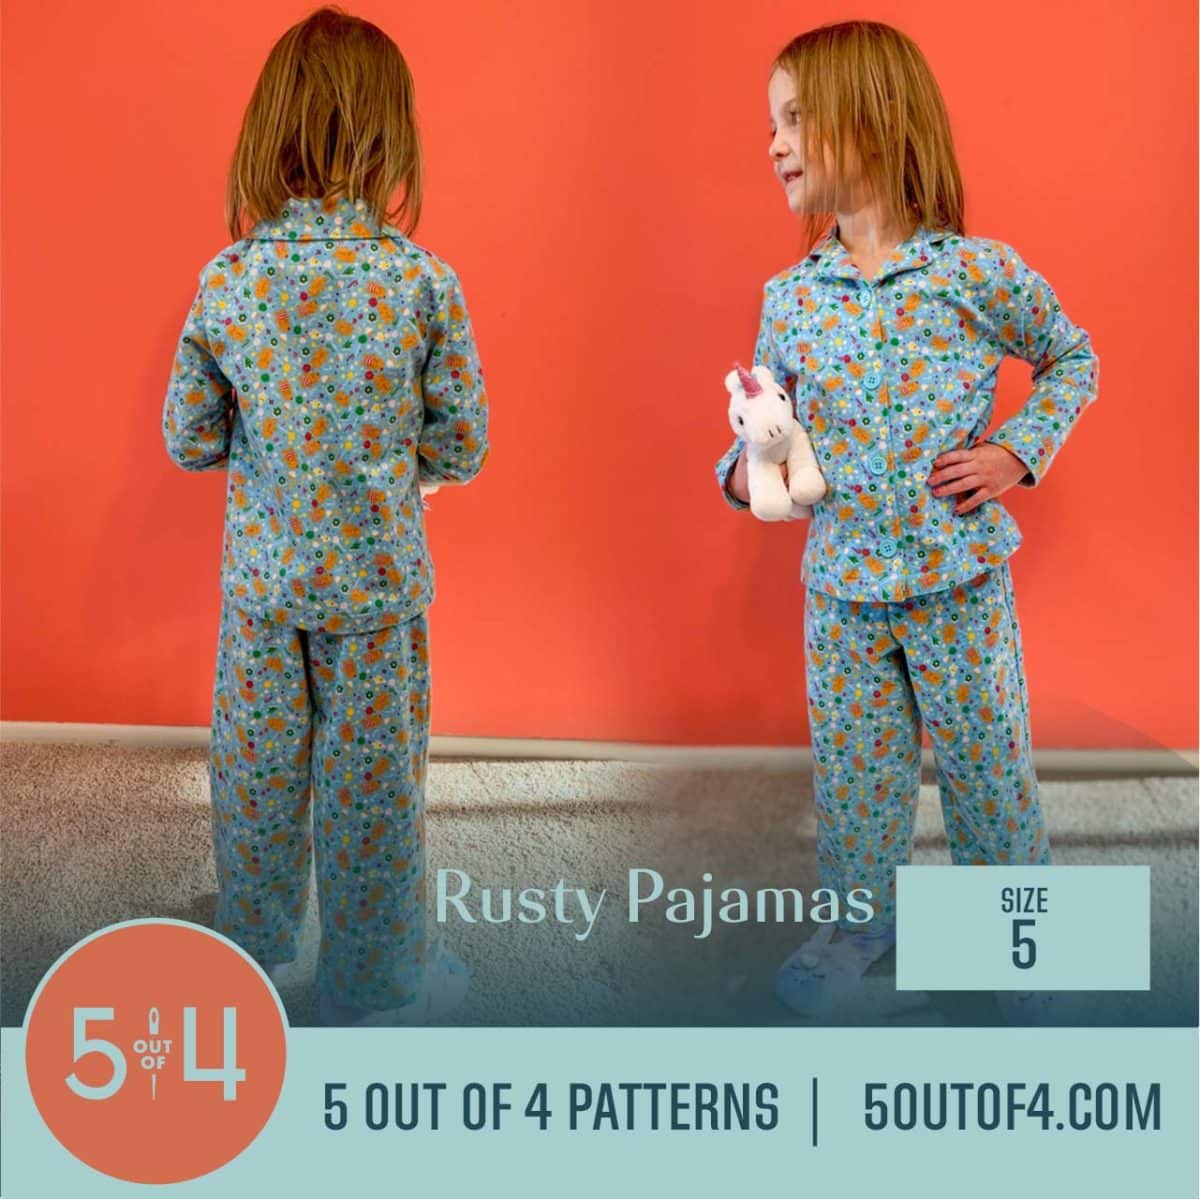 5oo4 Woven Pajama Pattern for Kids size 5